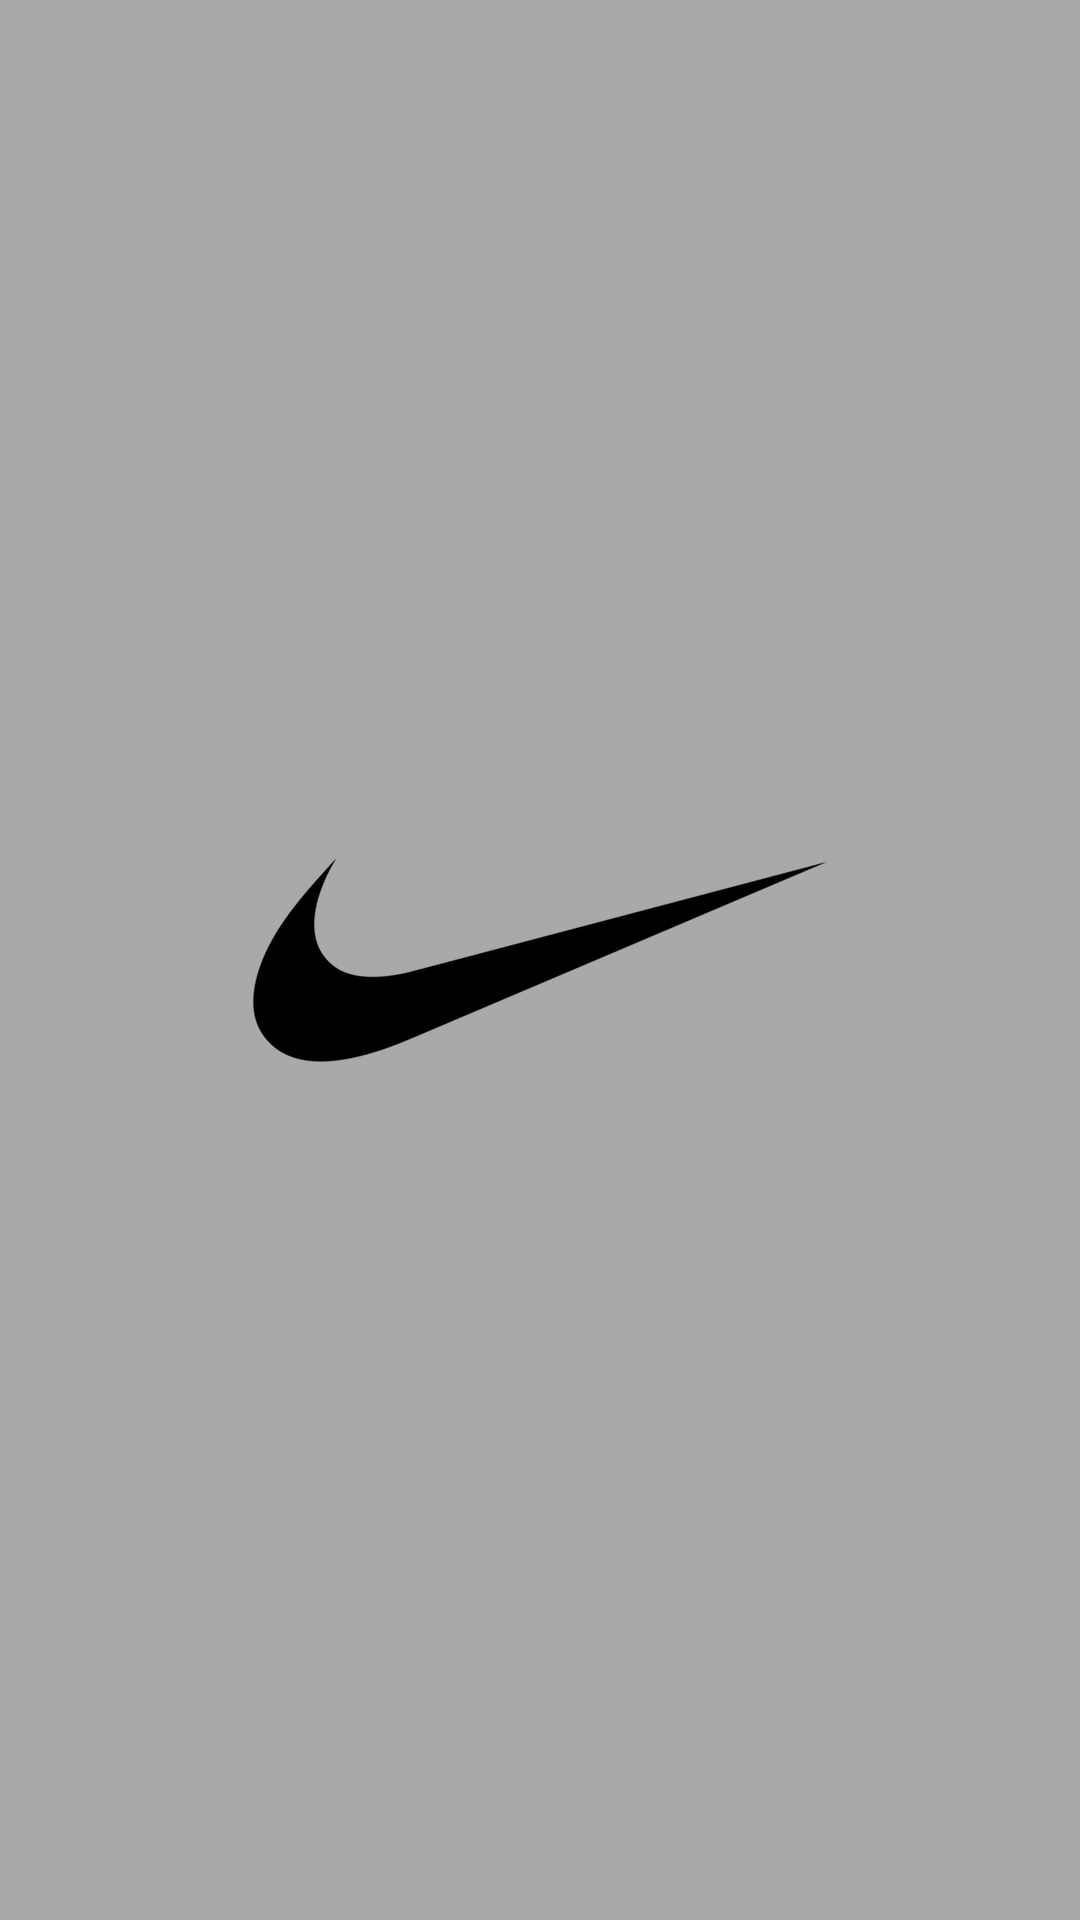 Red Nike Aesthetic Wallpapers